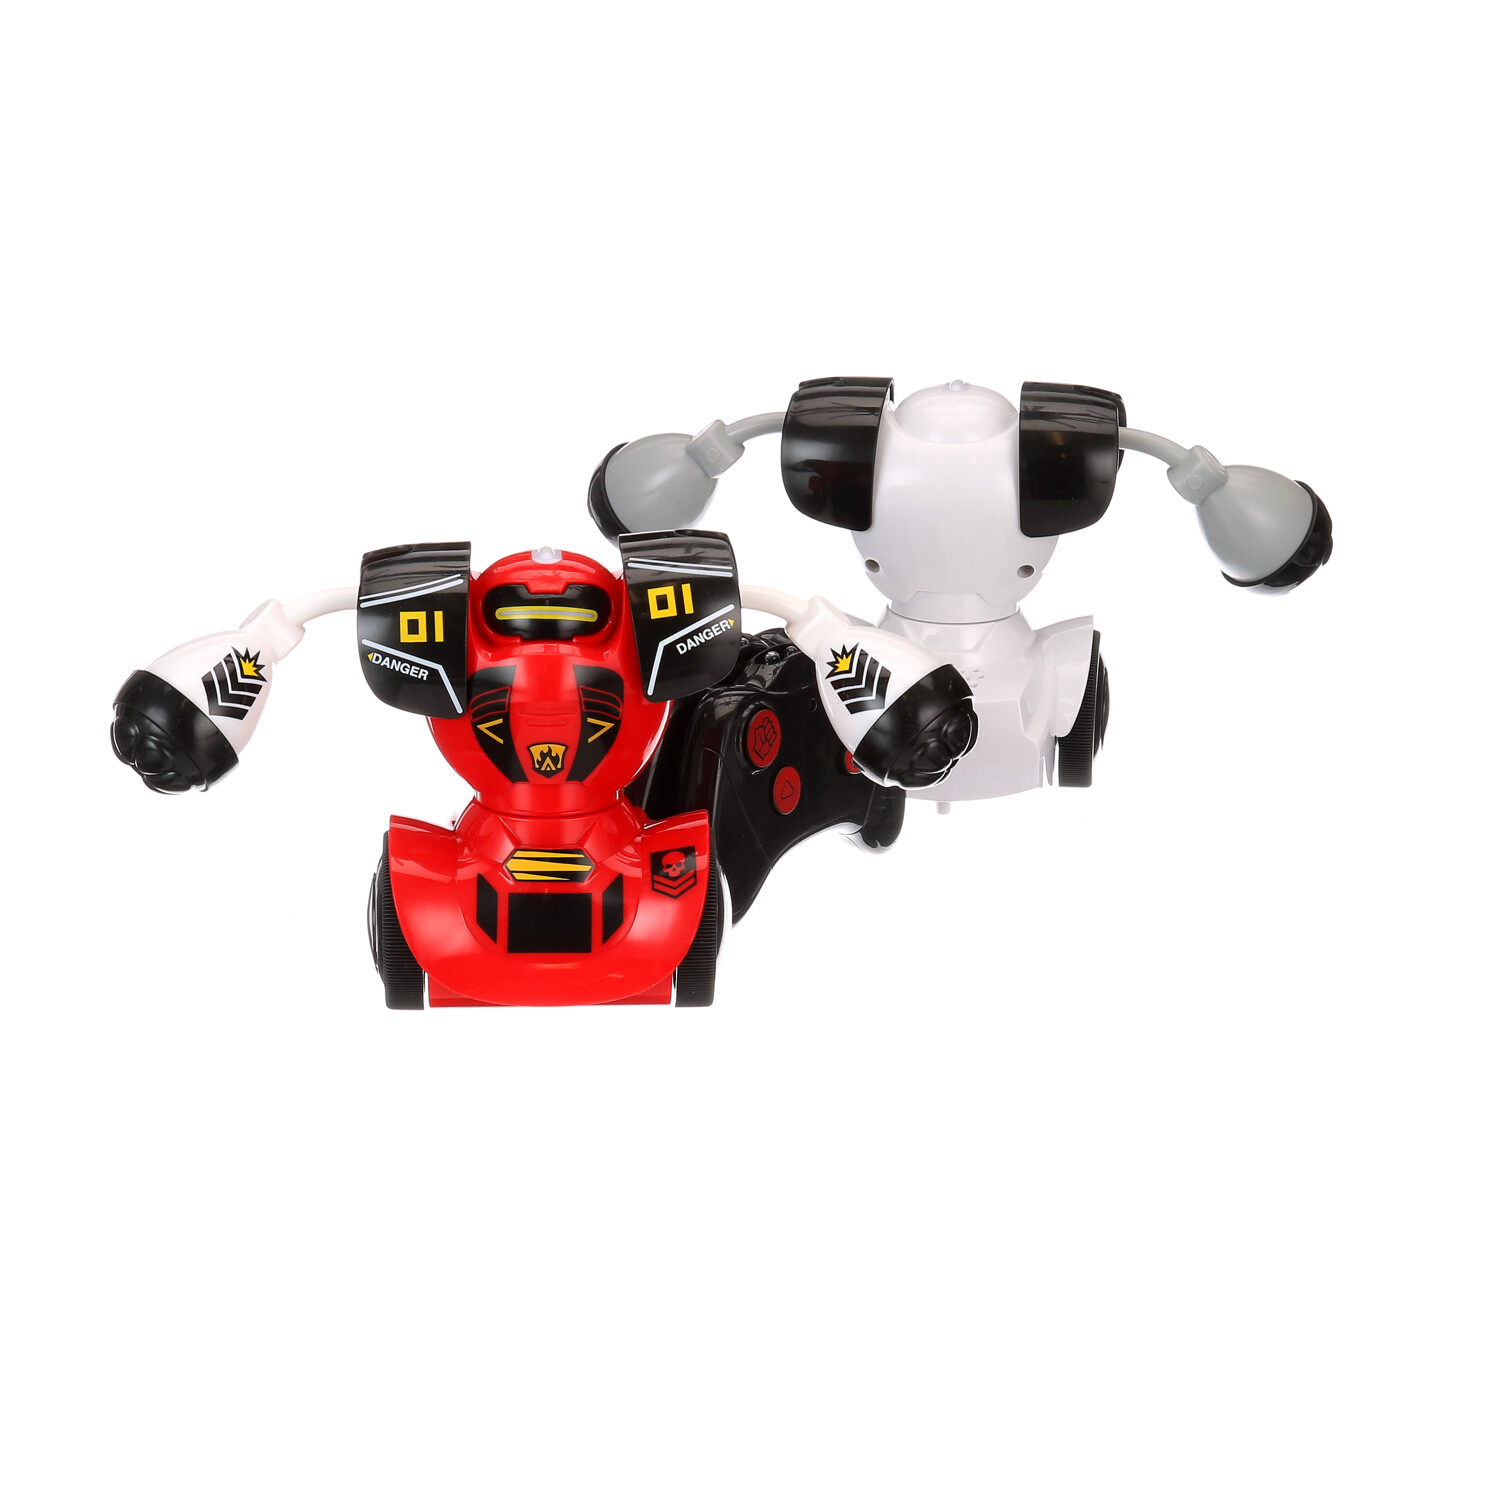 Sharper Image® Robot Combat Remote Control Robot Fighting Set, 4pcs - Red  And White